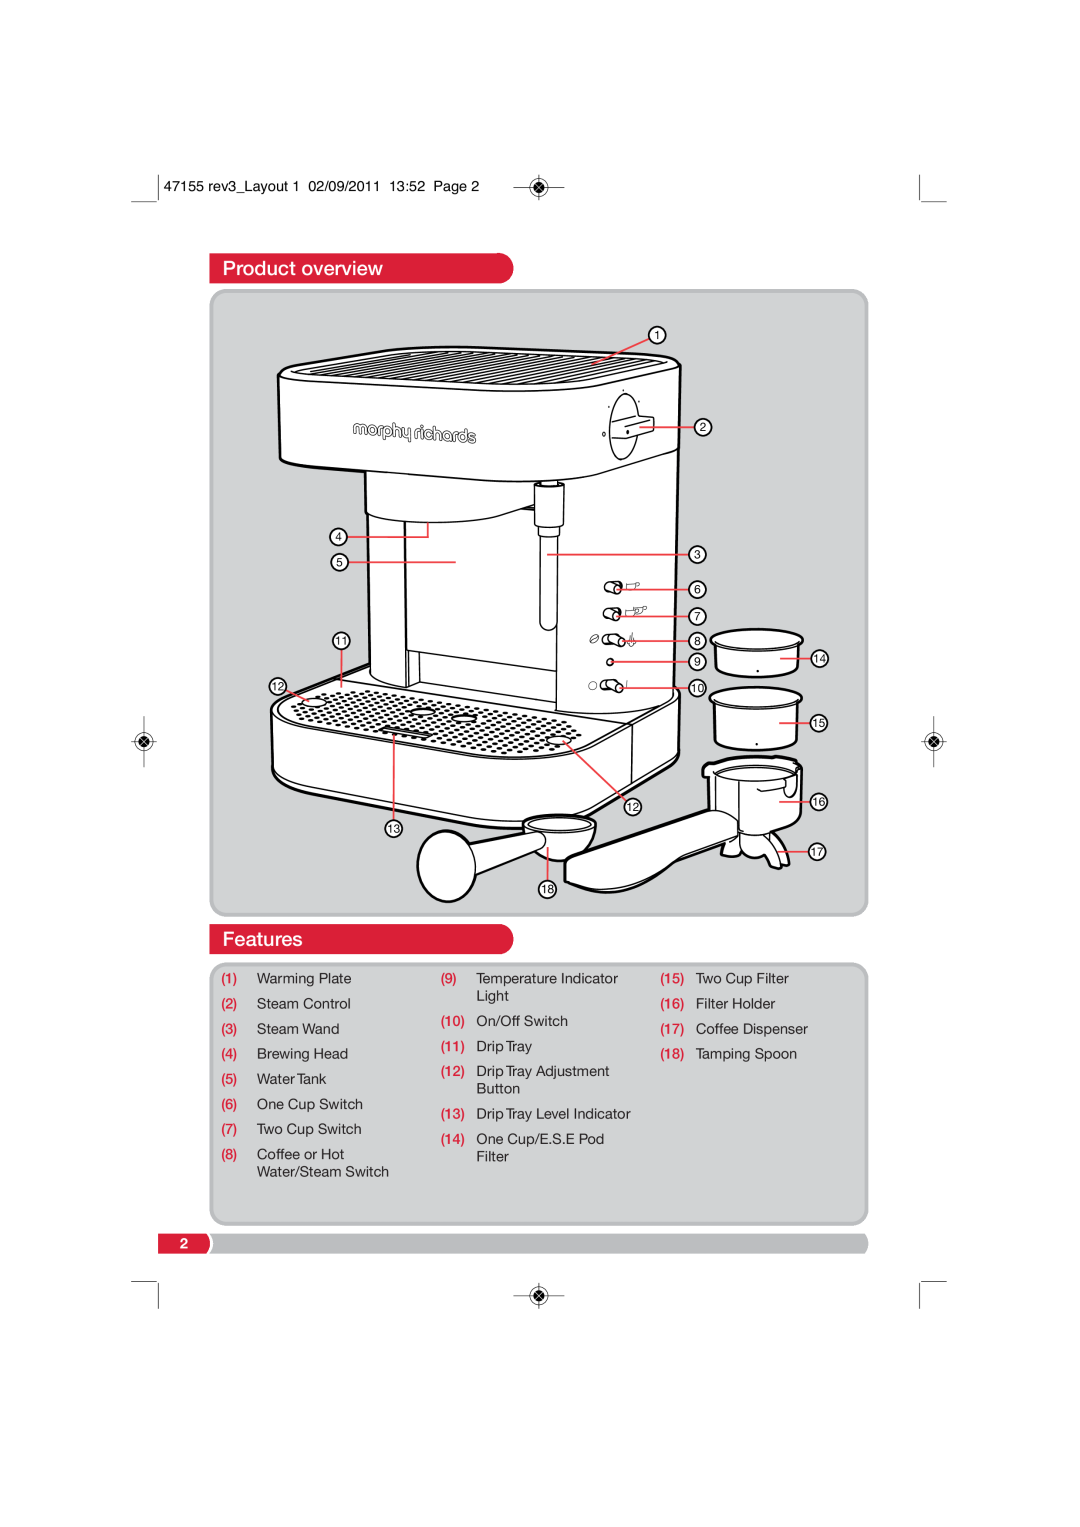 Morphy Richards 47155 manual Product overview, Features 